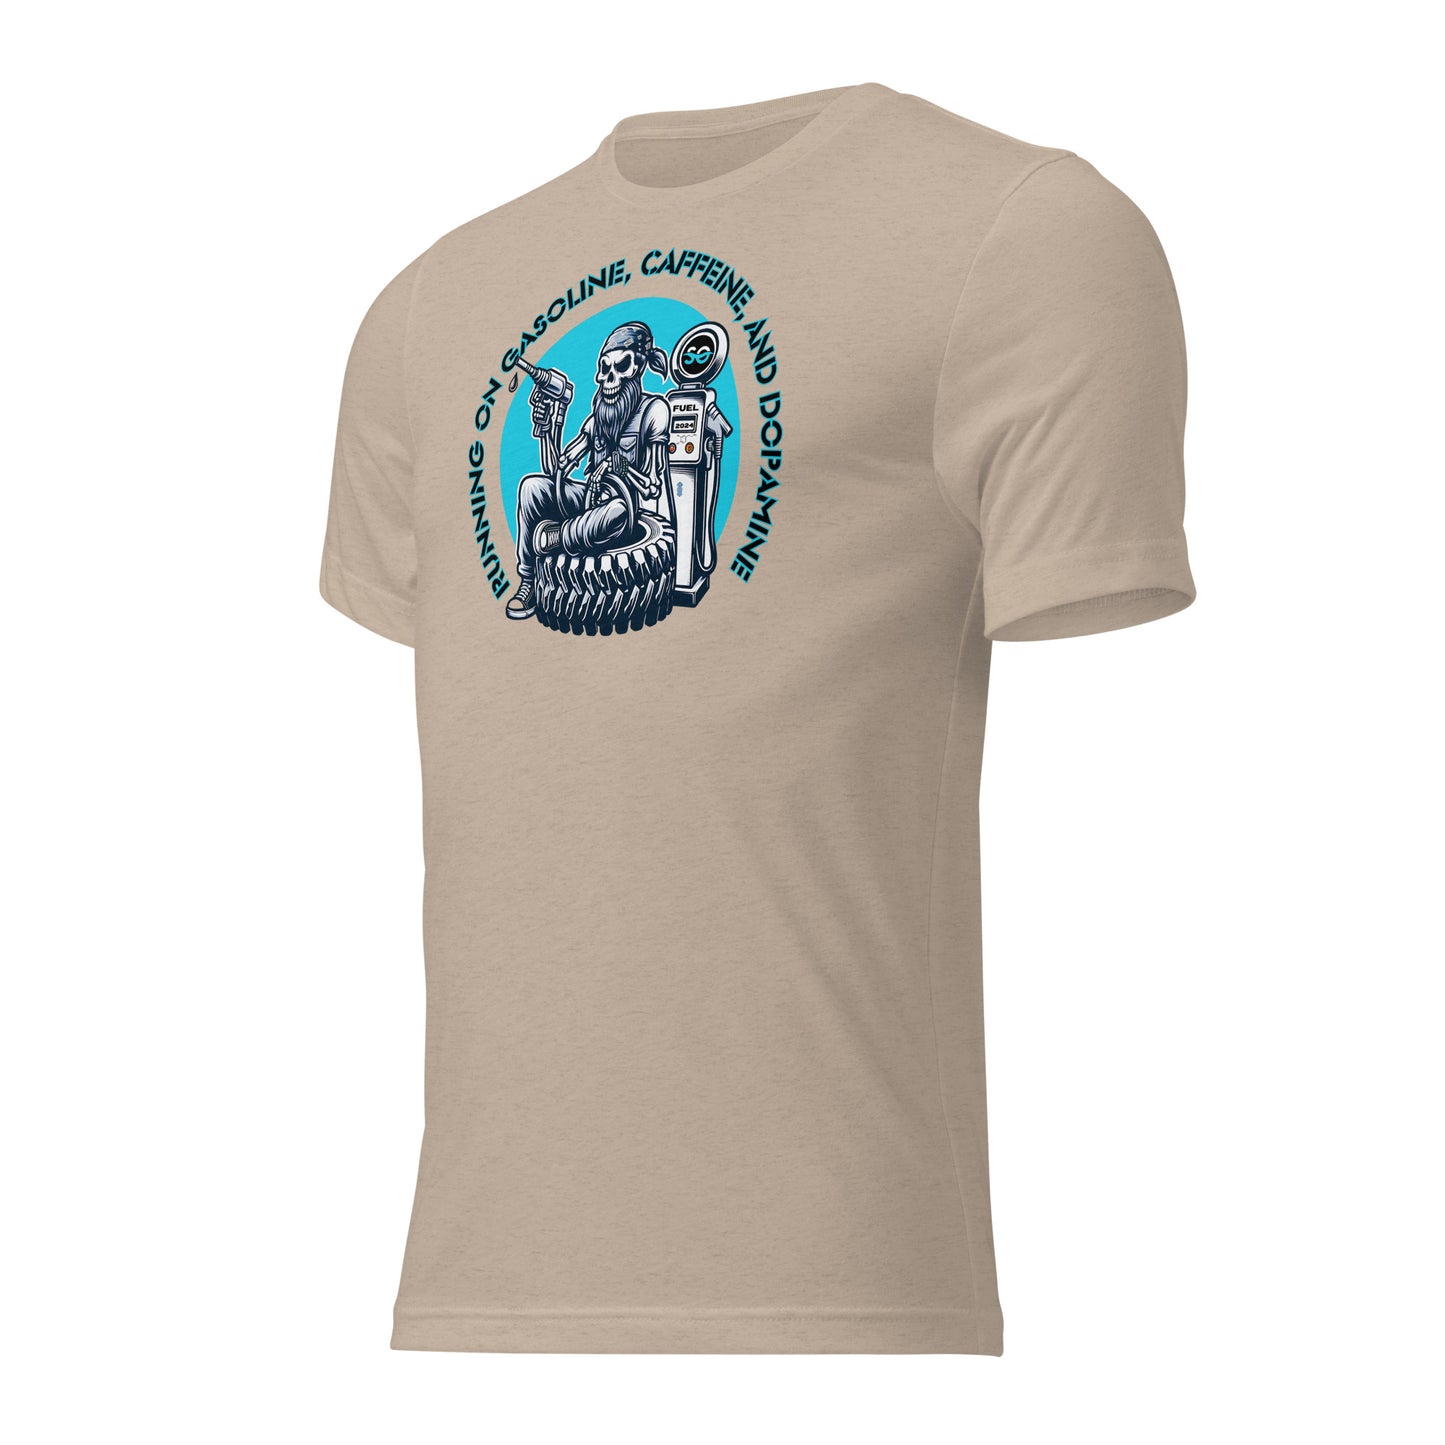 a t - shirt with a skeleton riding a motorcycle